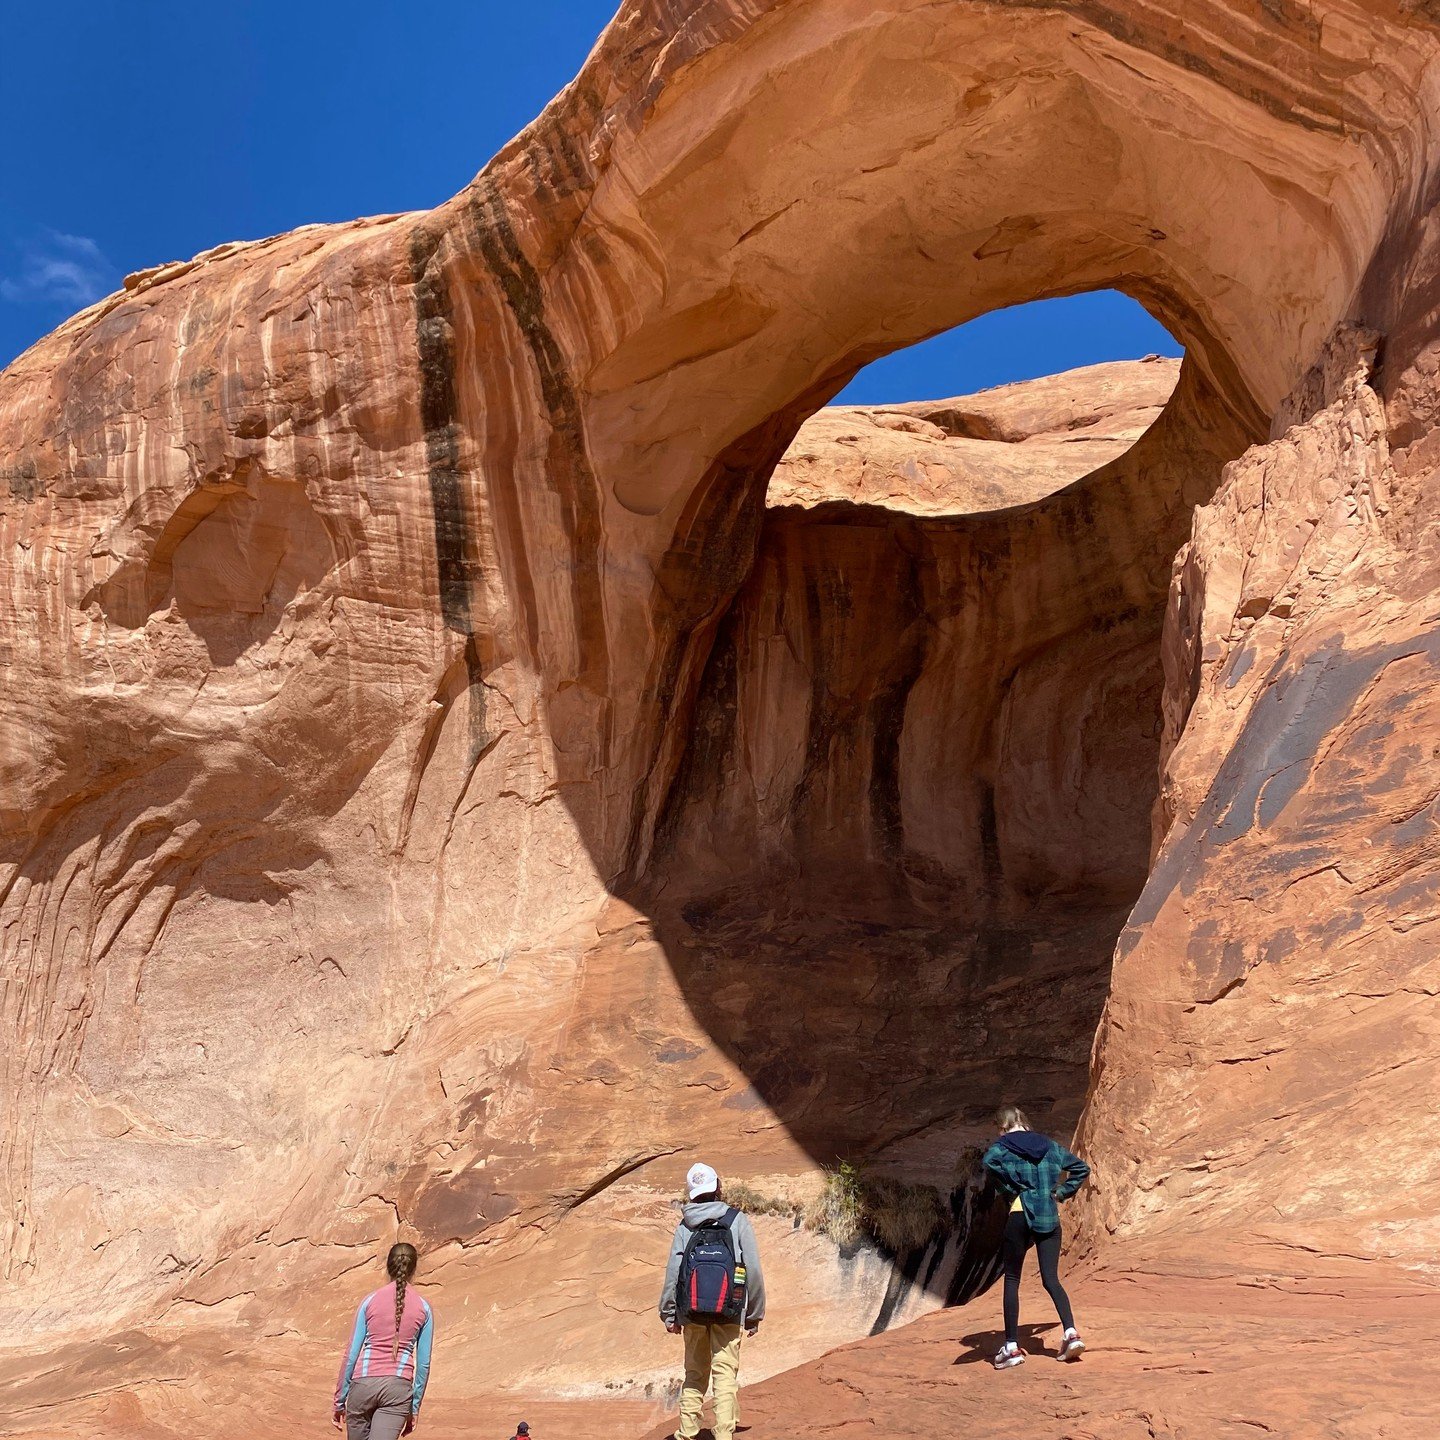 Holy cow! The Spring Break trip to Moab was epic!

Now we're looking ahead to Summer Outdoor Leadership trips to New Mexico, Wyoming, and Buena Vista, CO. Learn more and register at: https://teensinc.org/ol/